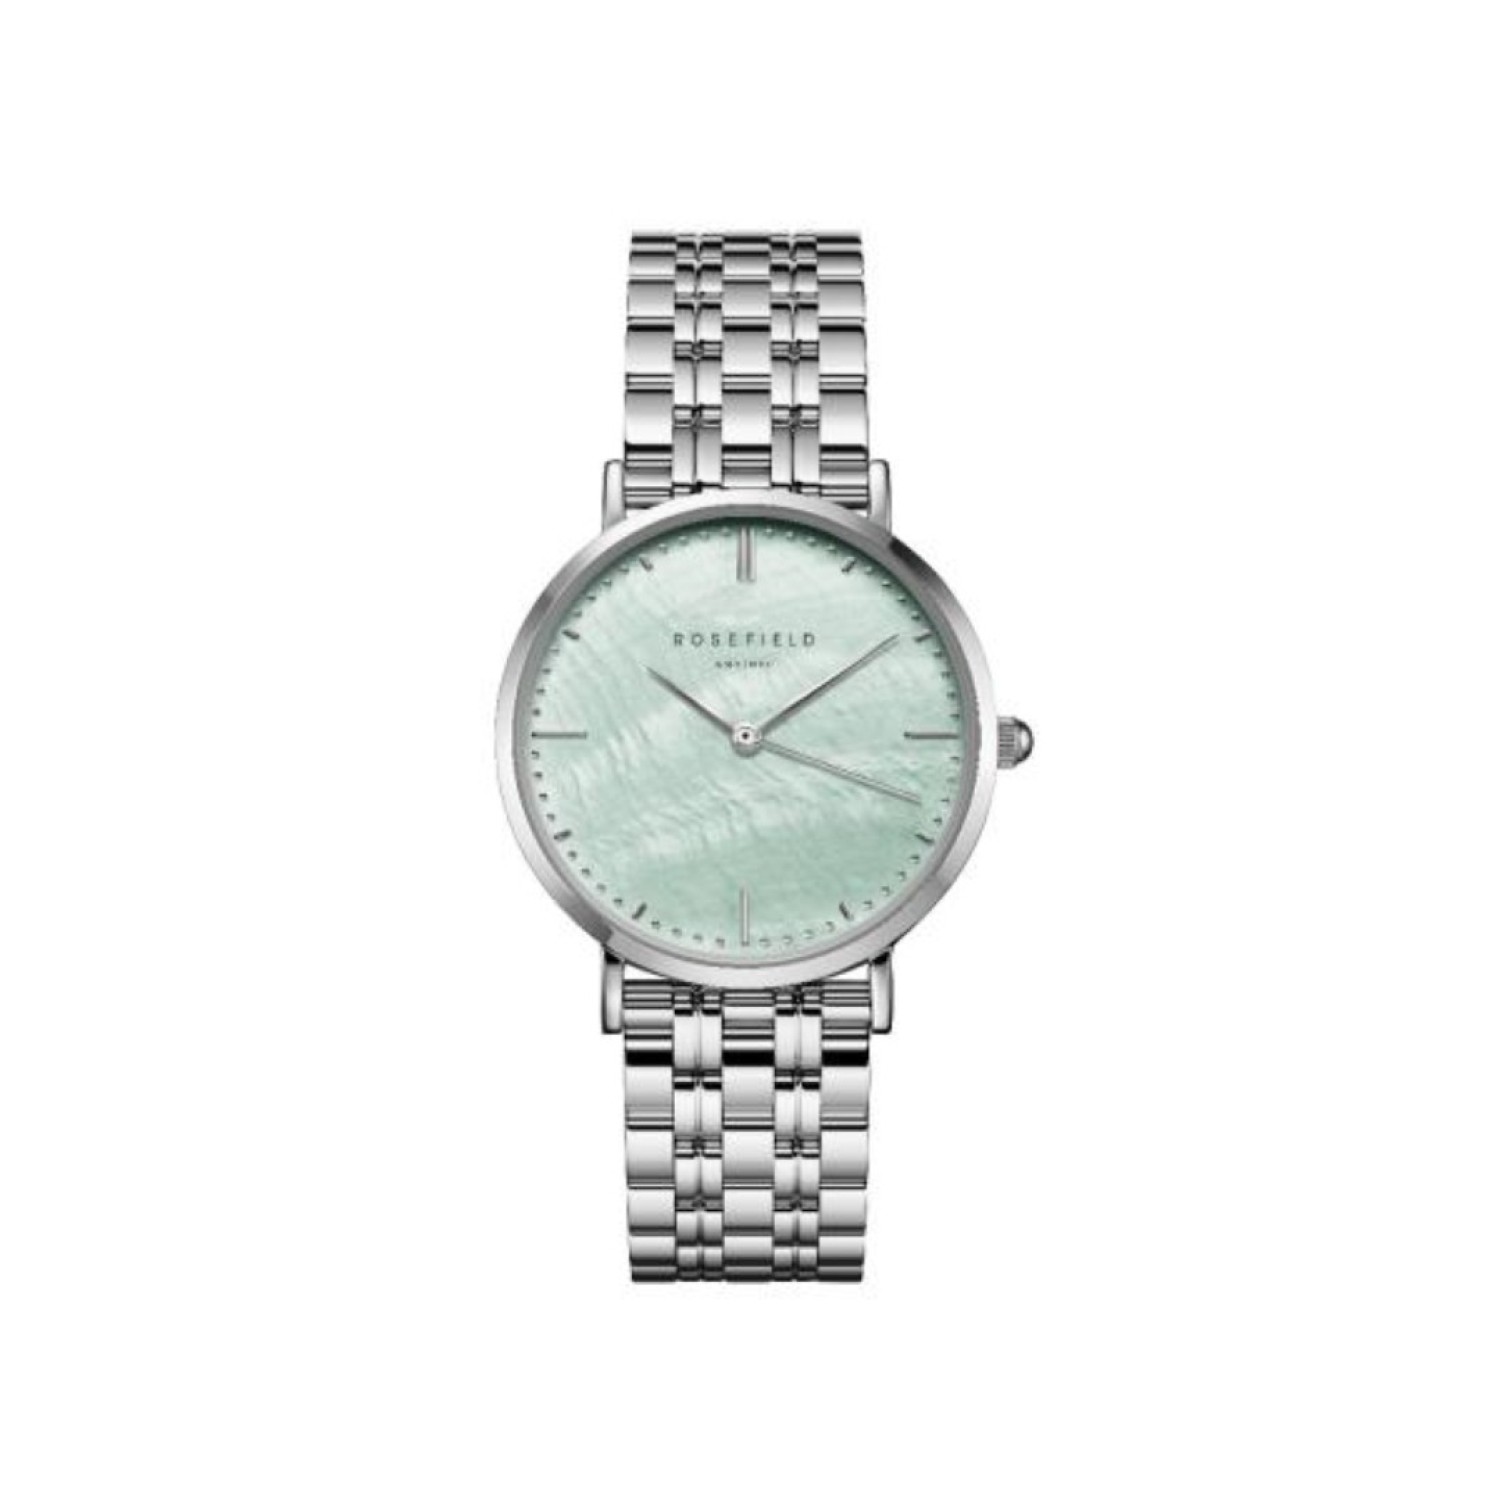 UGSSS-U38 Rosefield Silver UPPER EAST SIDE Mint Green Dial Watch UGSSS-U38 Rosefield Watches Auckland | With their stylish designs and packaging, Rosefield watches make excellent gifts for special occasions.